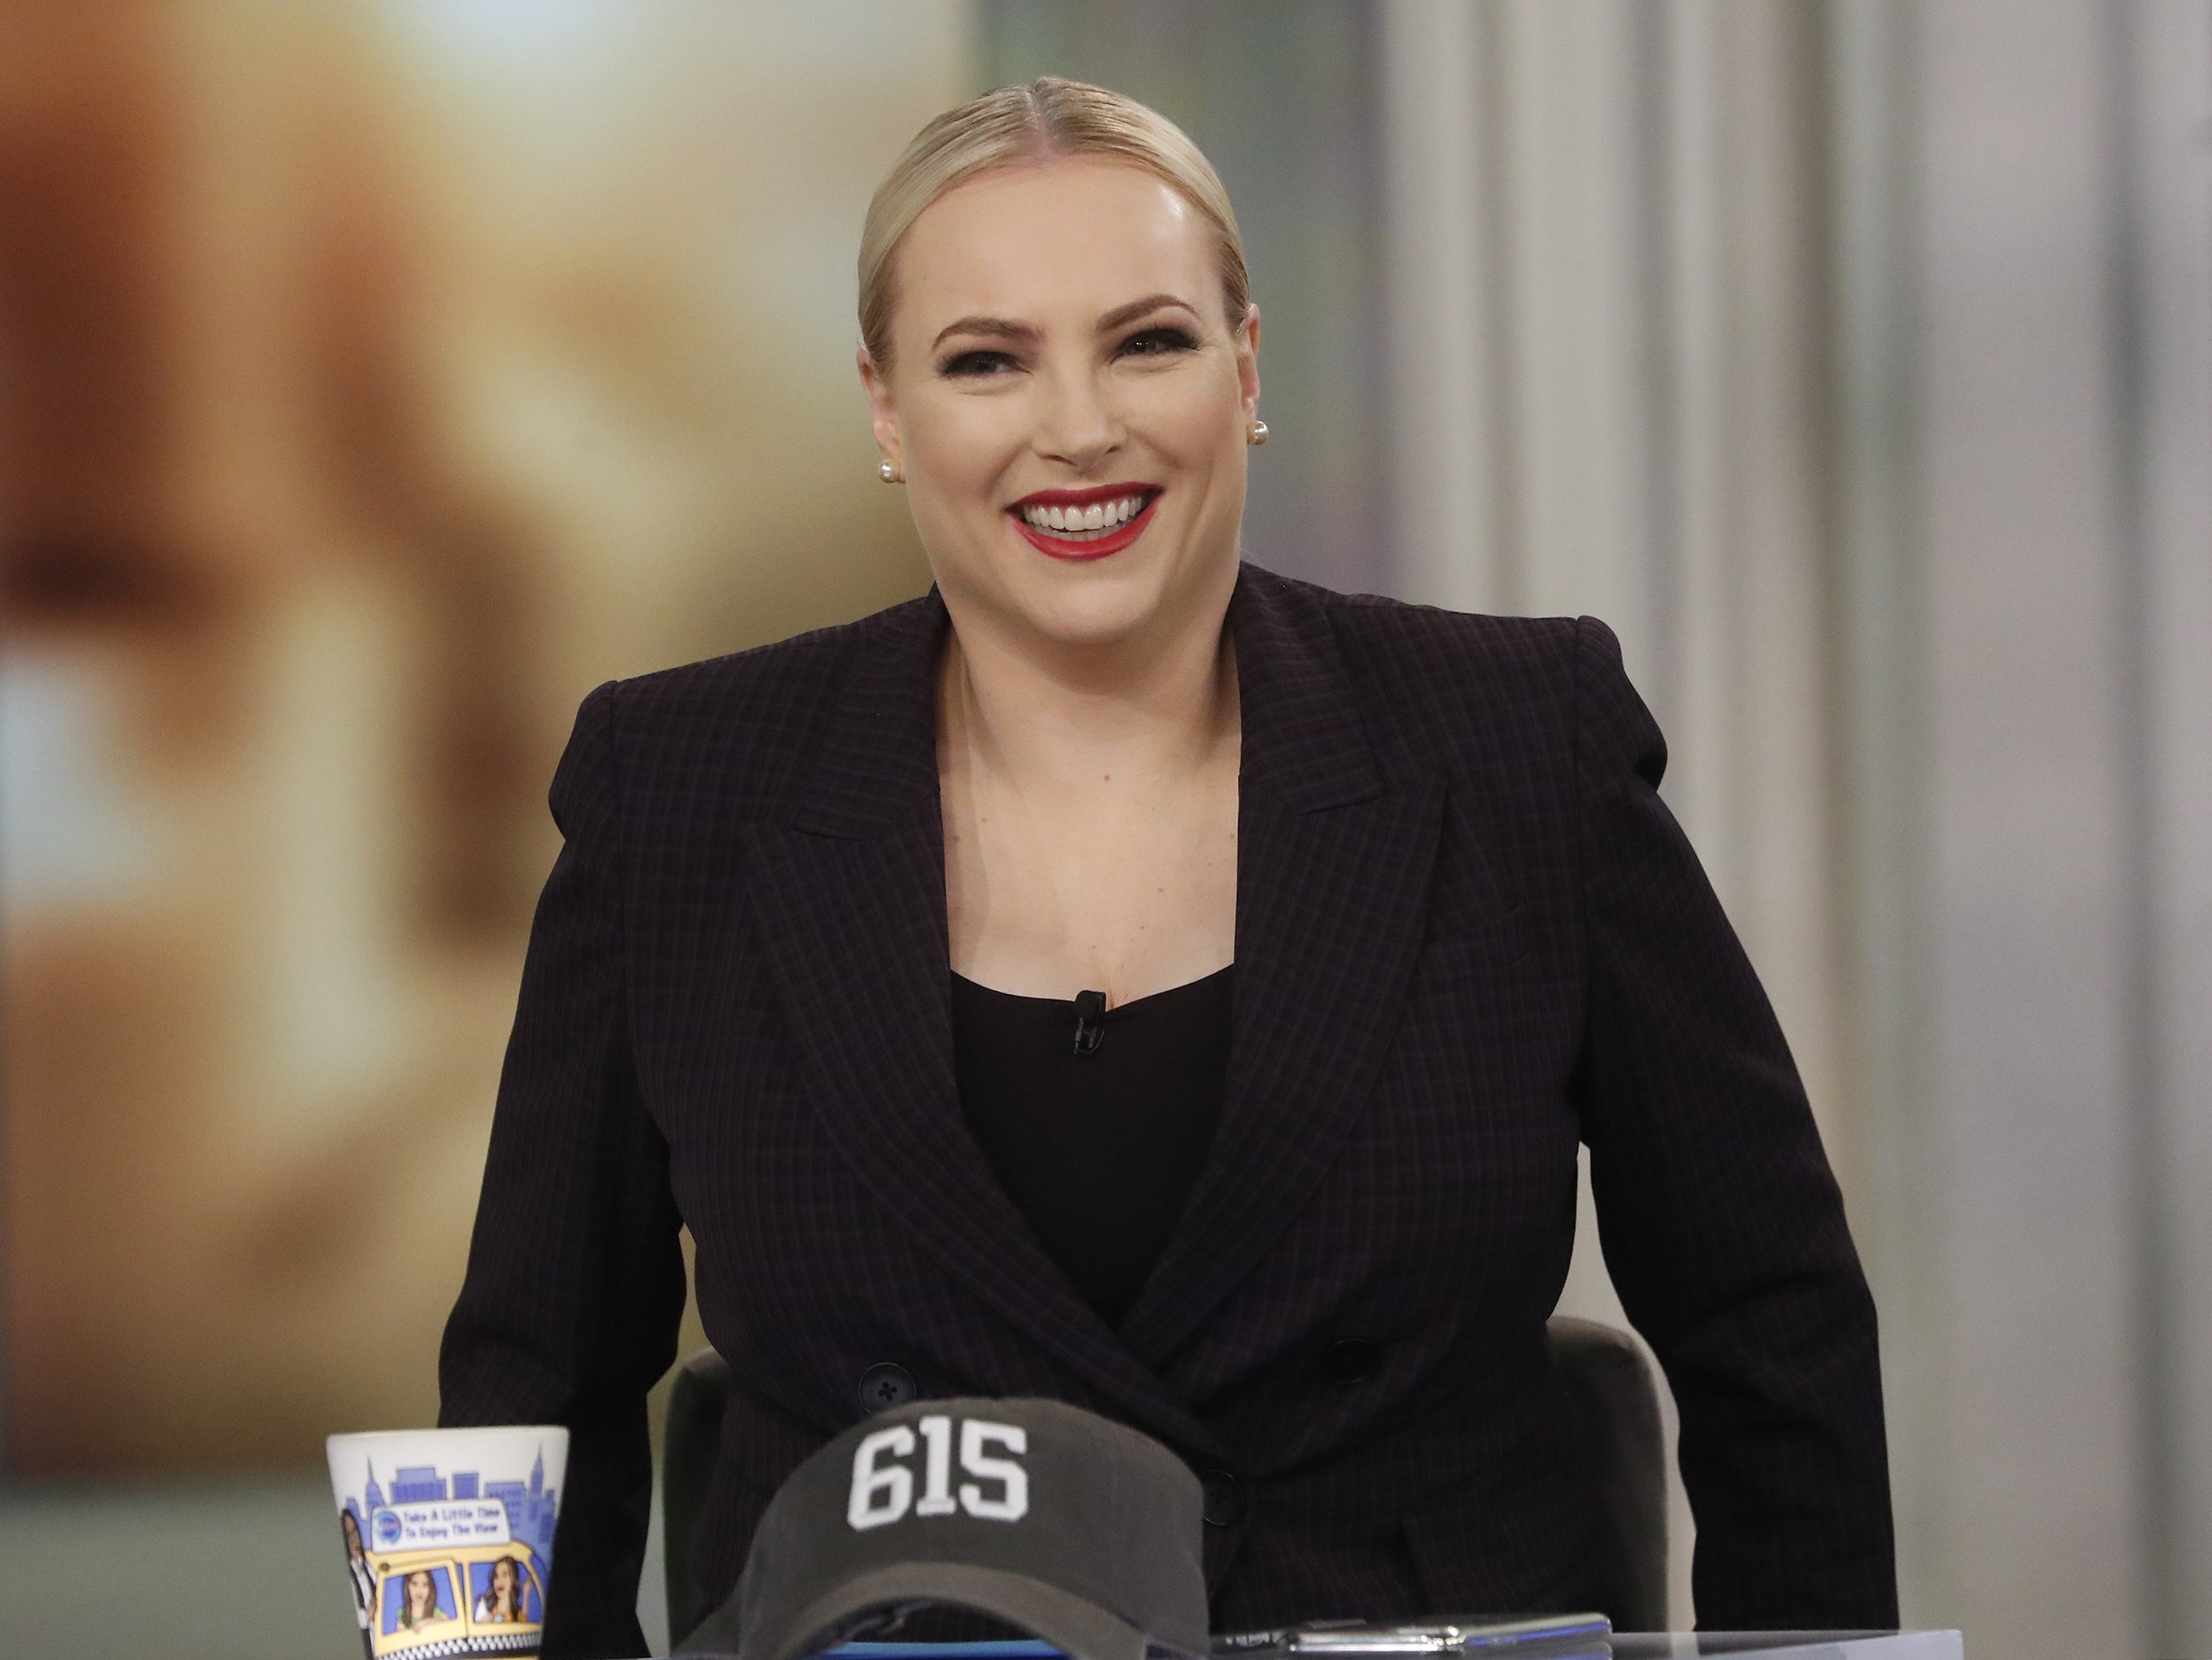 Meghan McCain appears on an episode of "The View" on Wednesday, March 11, 2020 | Photo: Getty Images